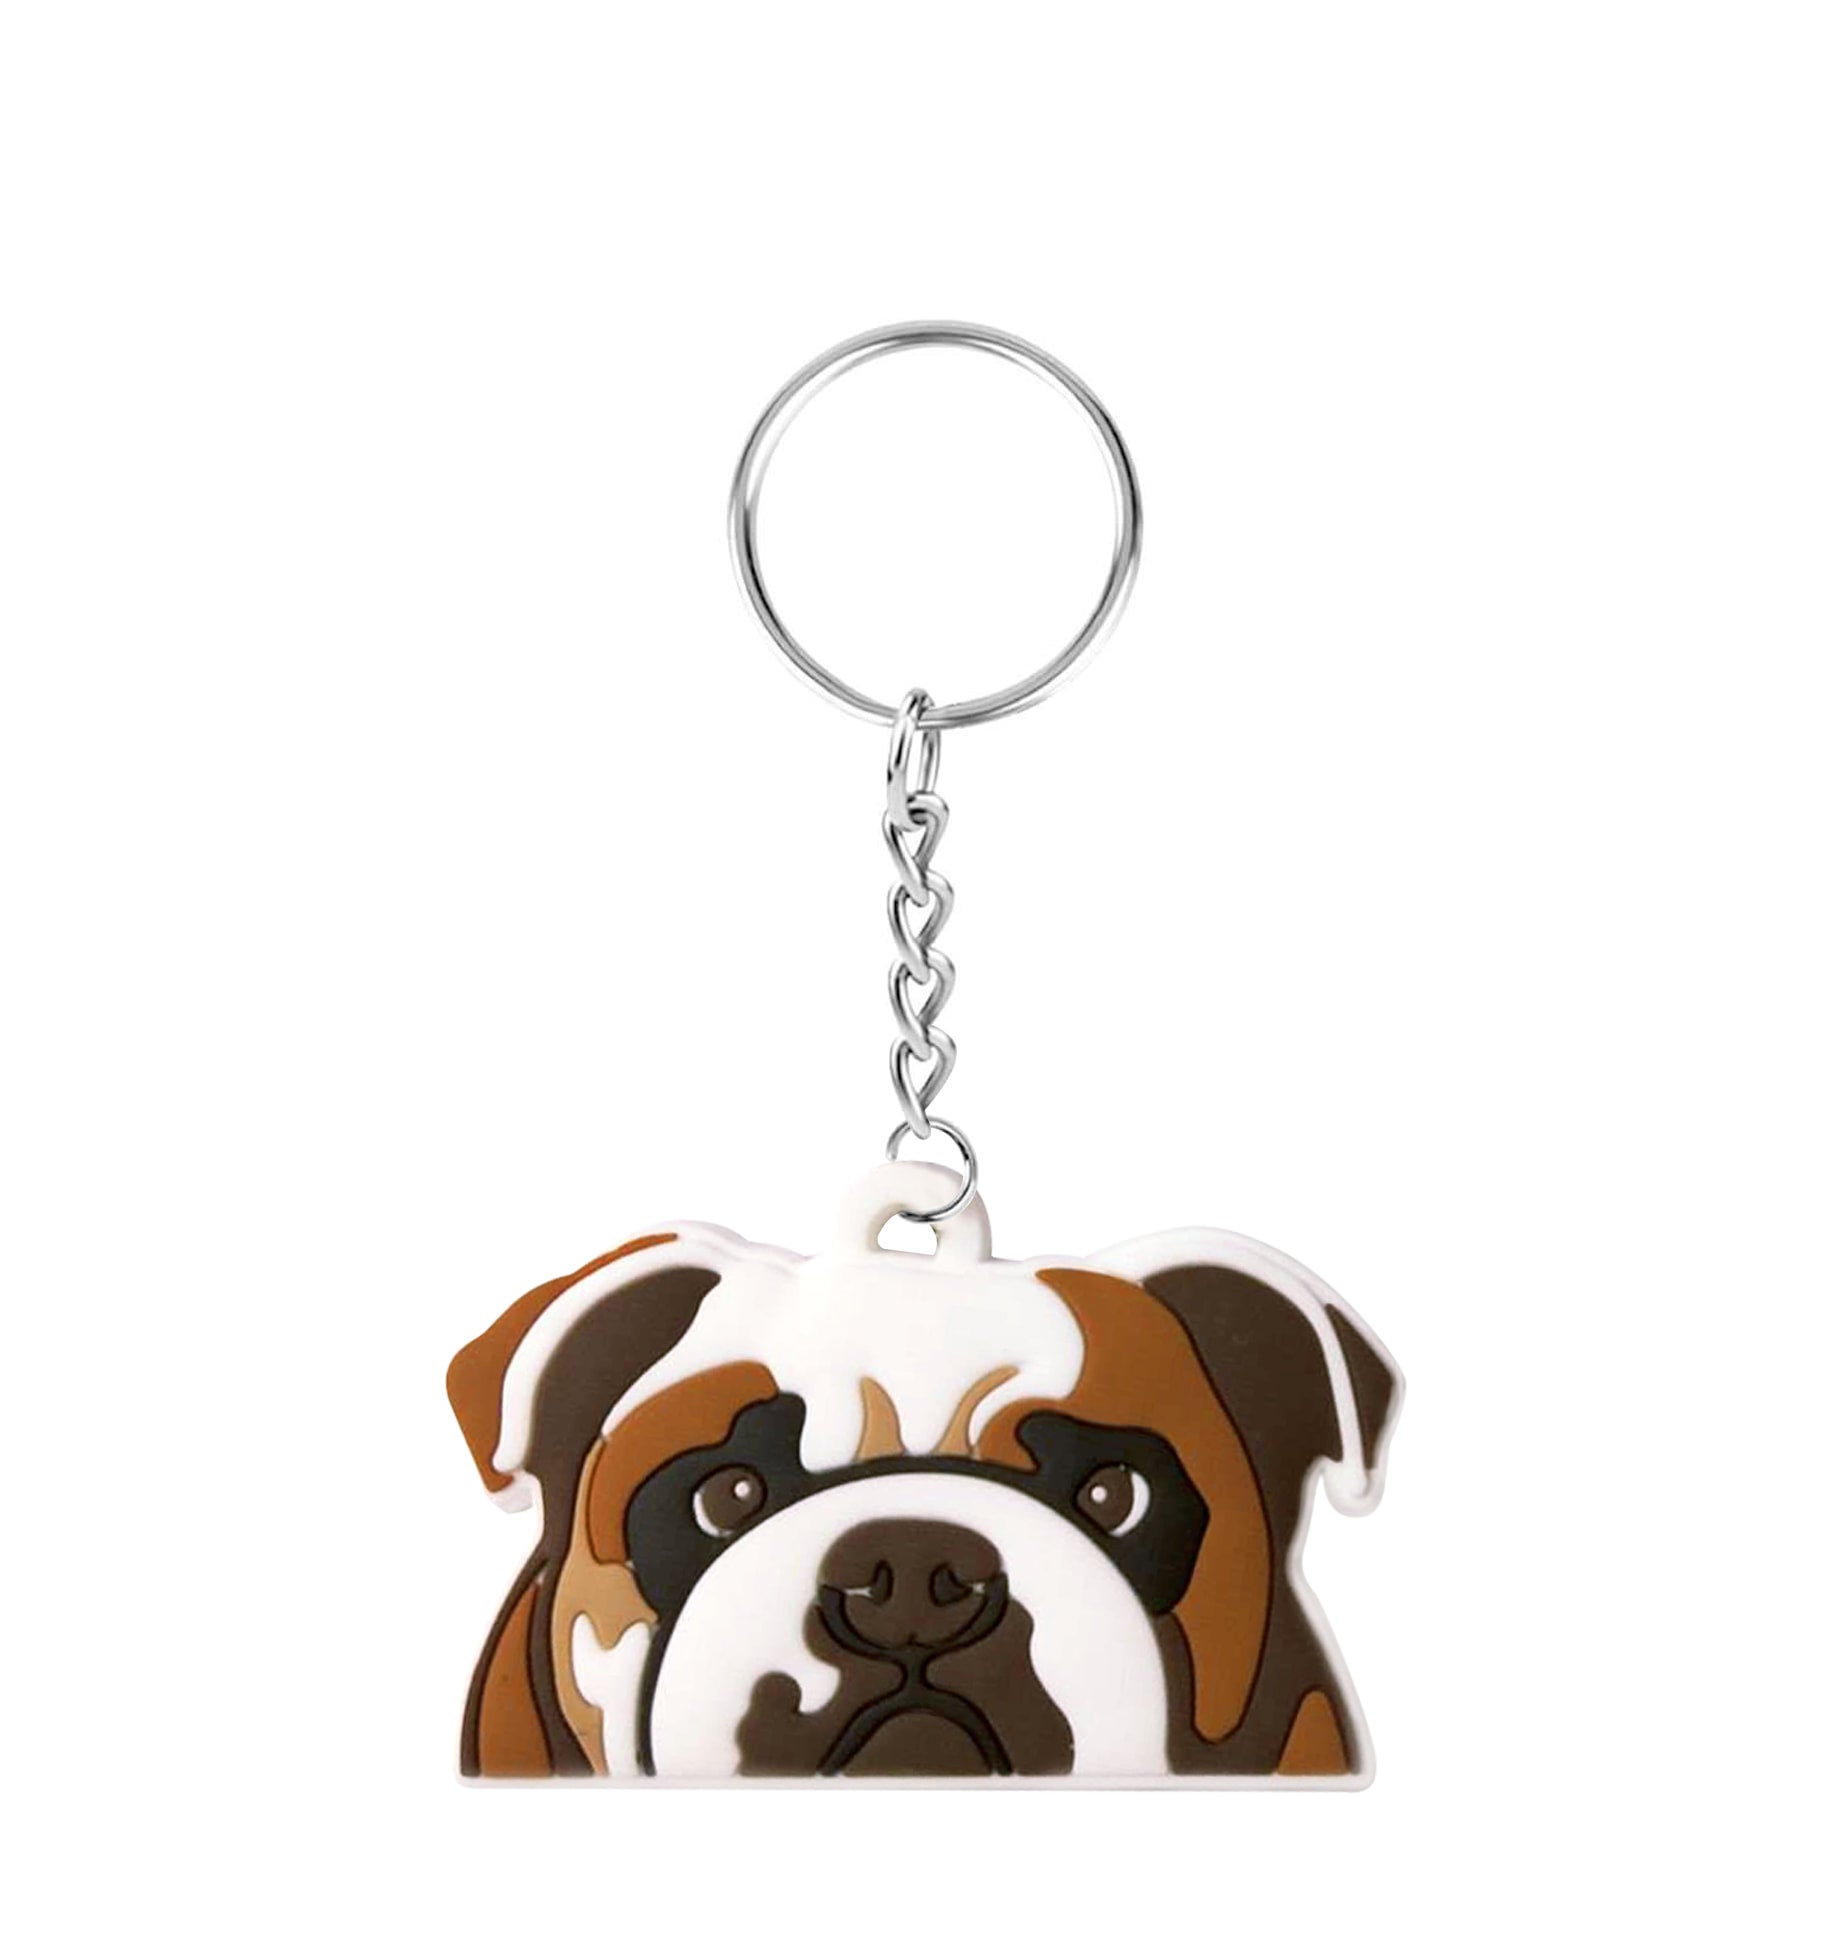 Rubber Decoration Accessories, French Bulldog Keychains